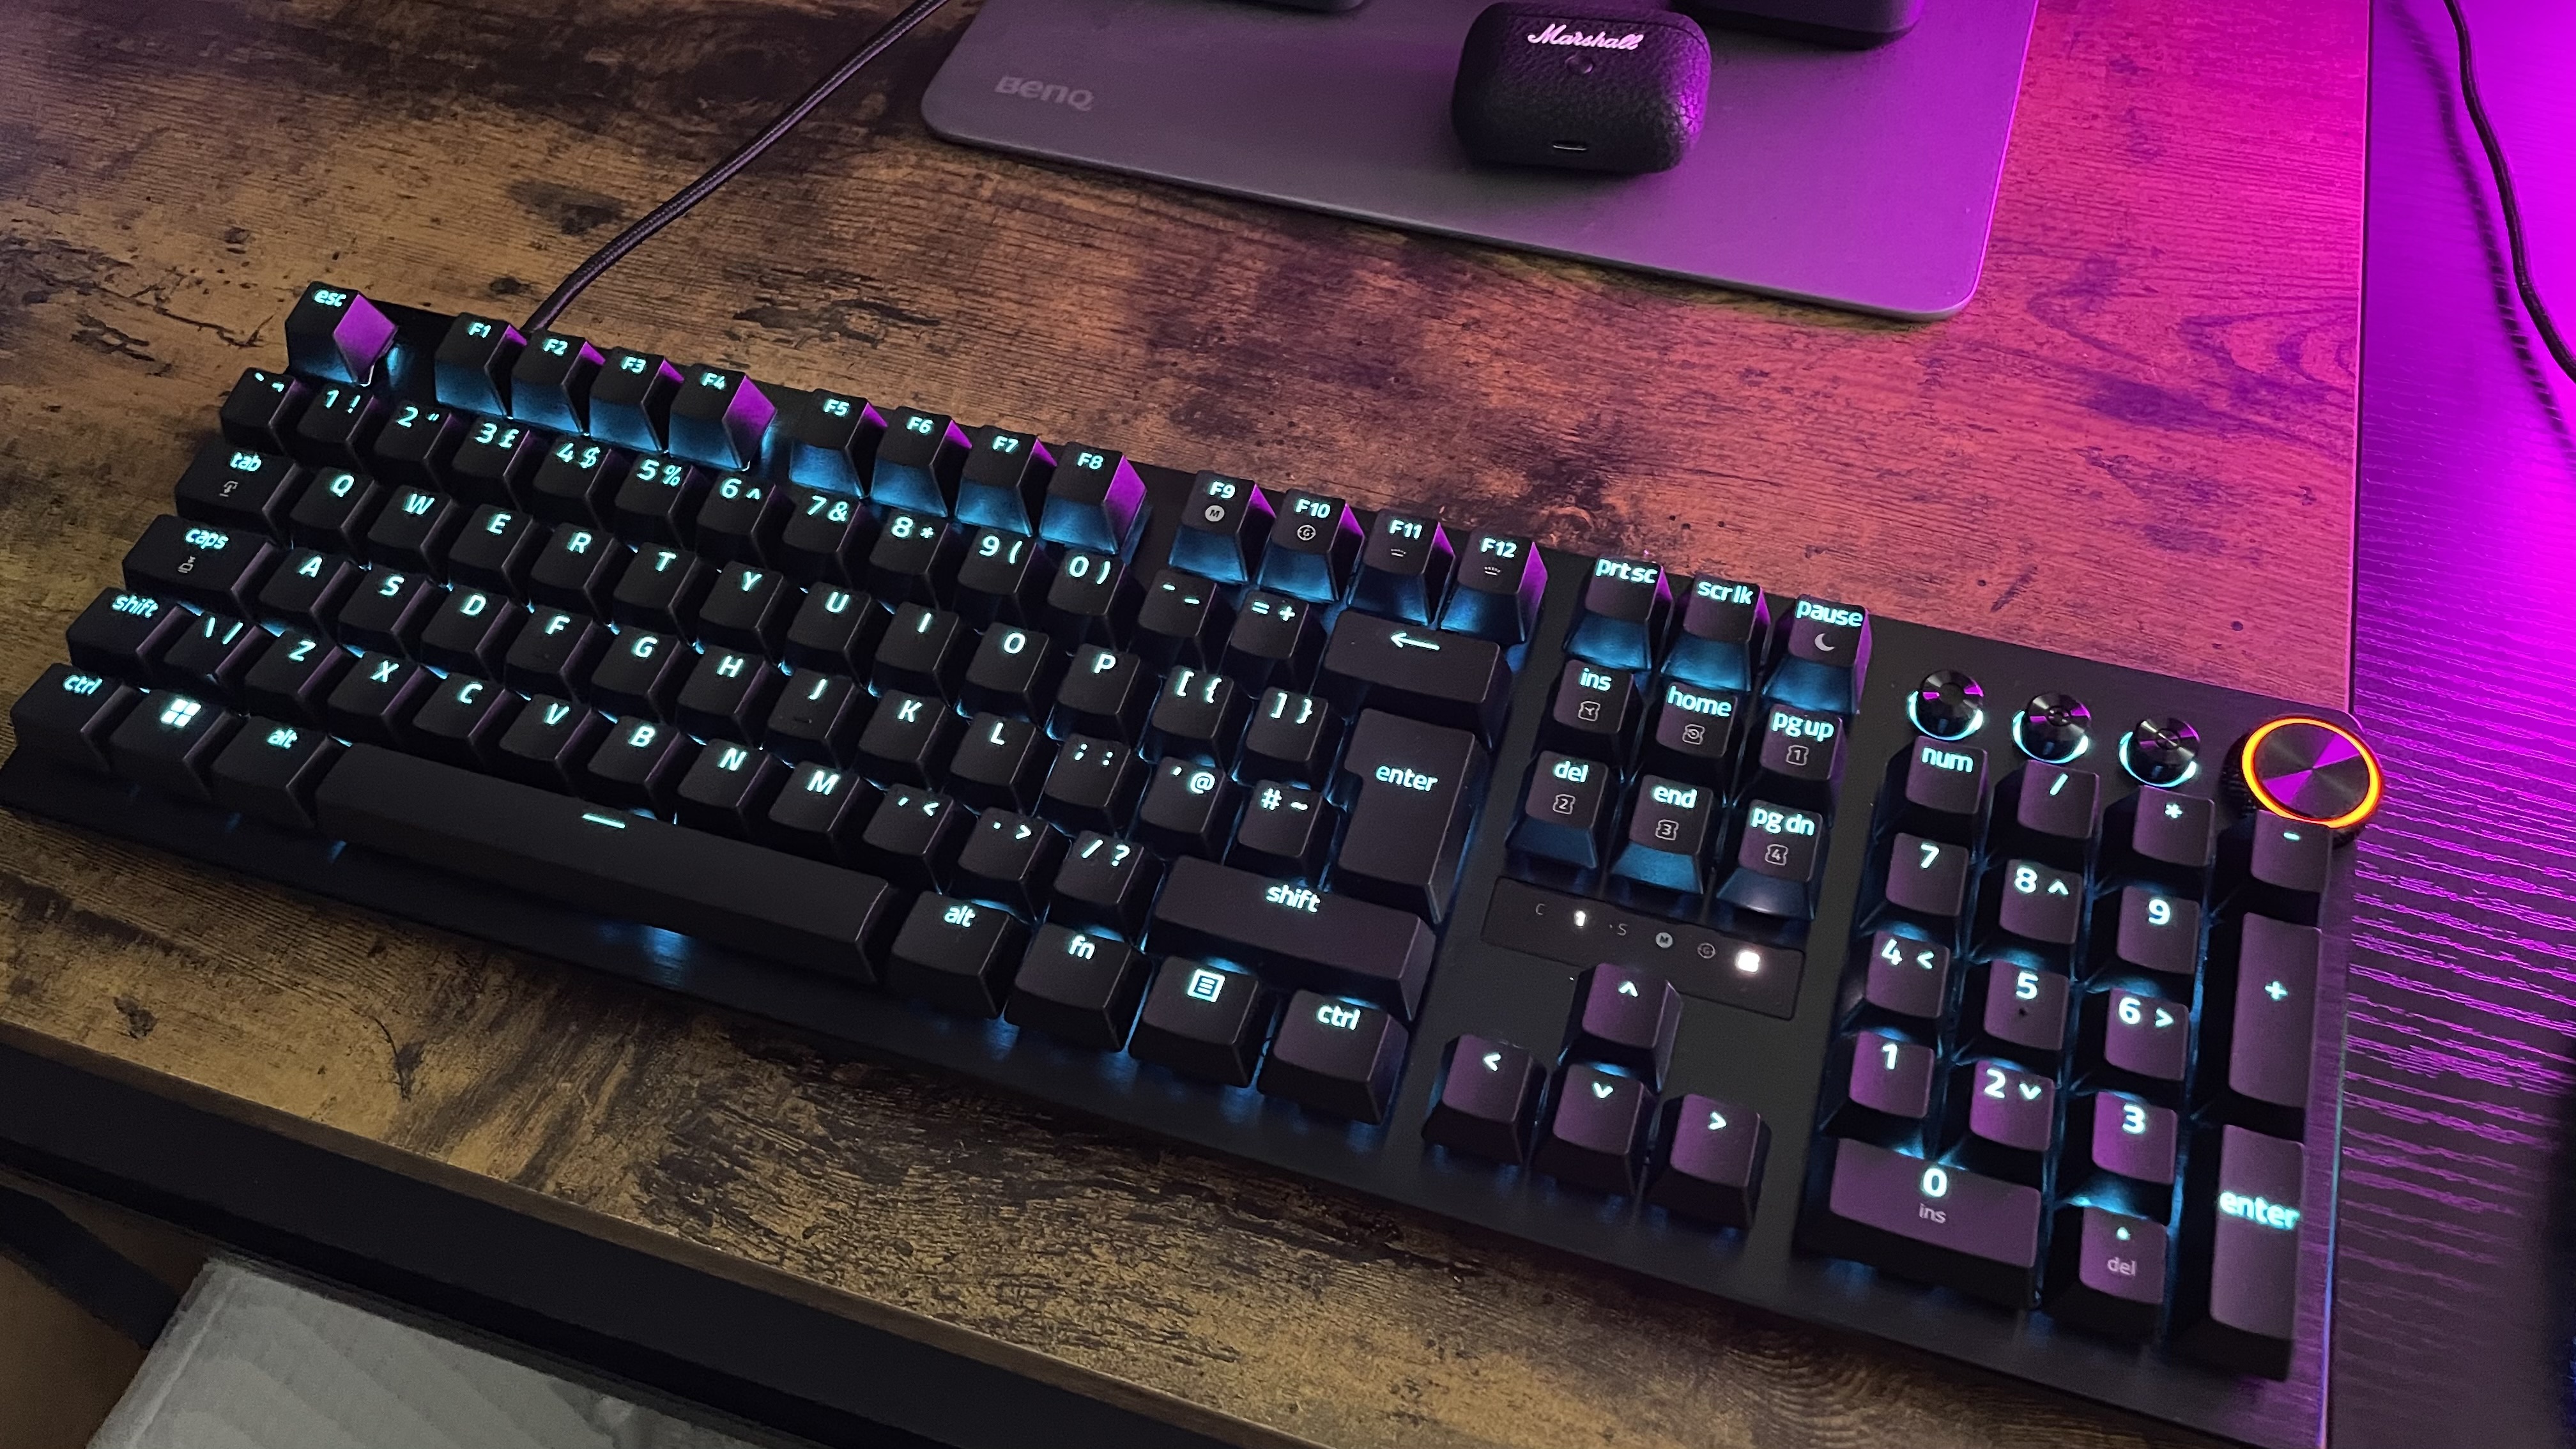 The Razer Huntsman V3 Pro is shown pictured on a wood effect desktop with a purple light coming from the right of the image. The keys are illuminated in pale blue.